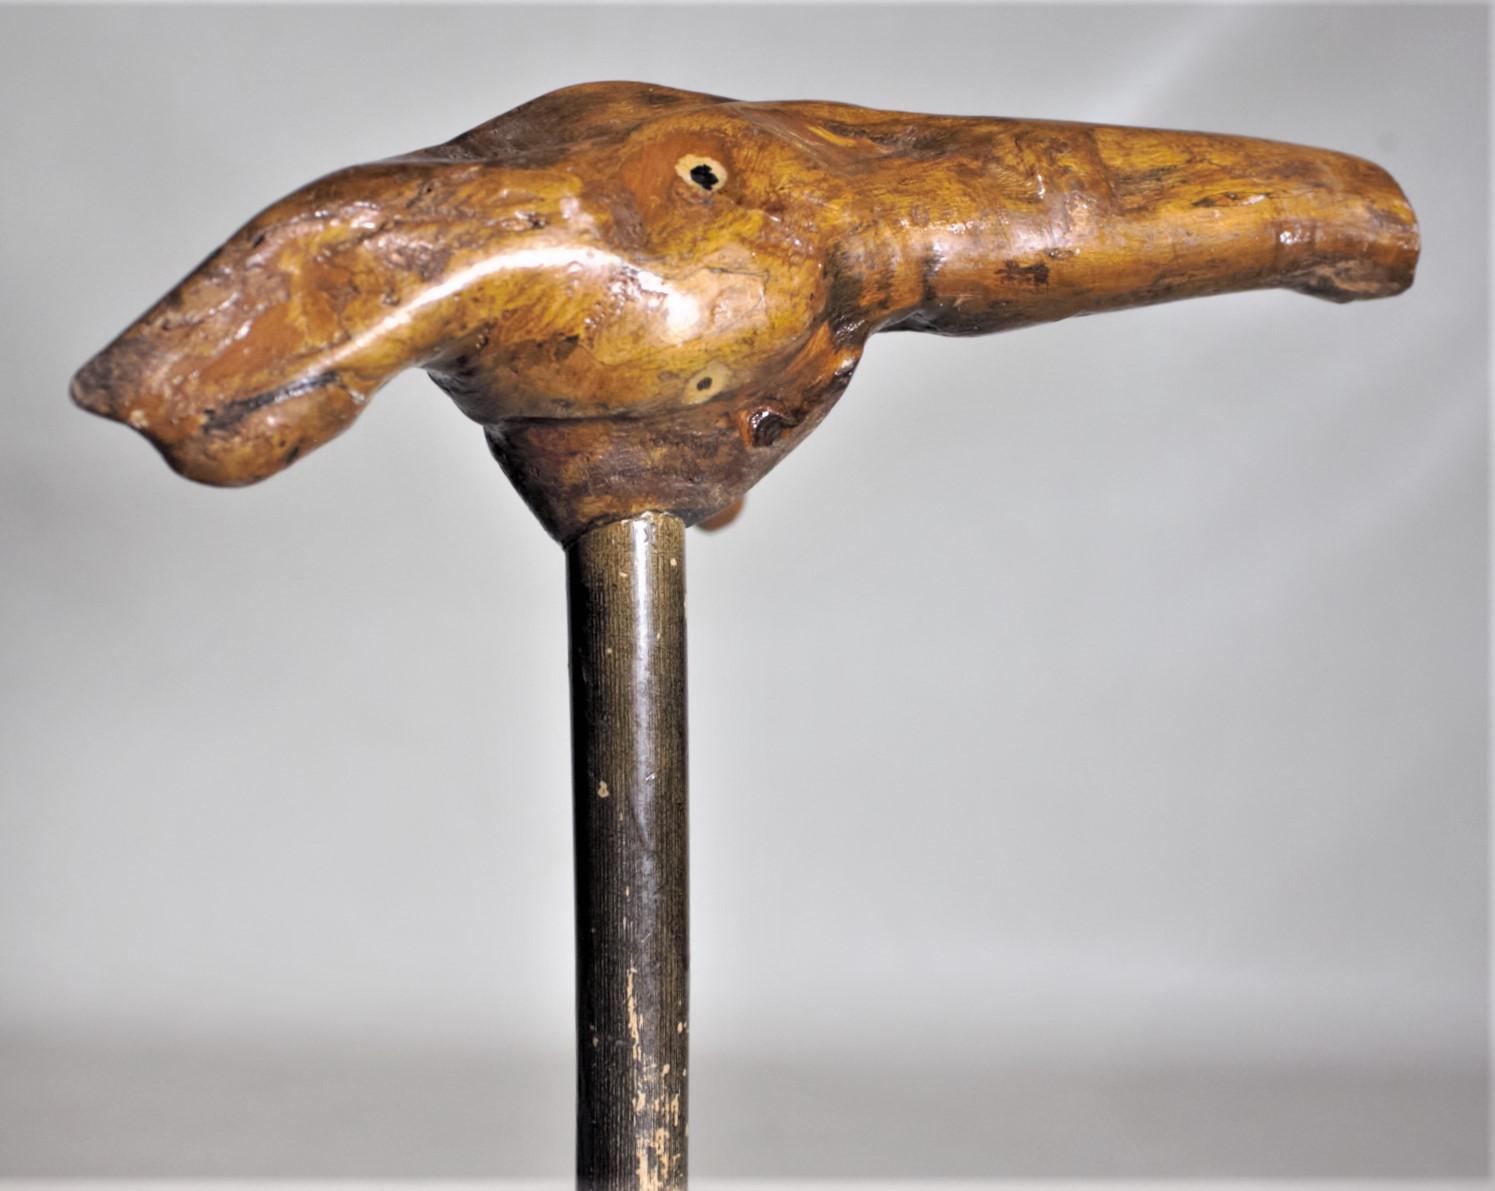 This Folk Art cane or walking stick is completely unmarked, but presumed to have been made in the United States in circa 1920 in the Folk Art style. The handle of the cane is a lacquered piece of burled wood that may have been intended to resemble